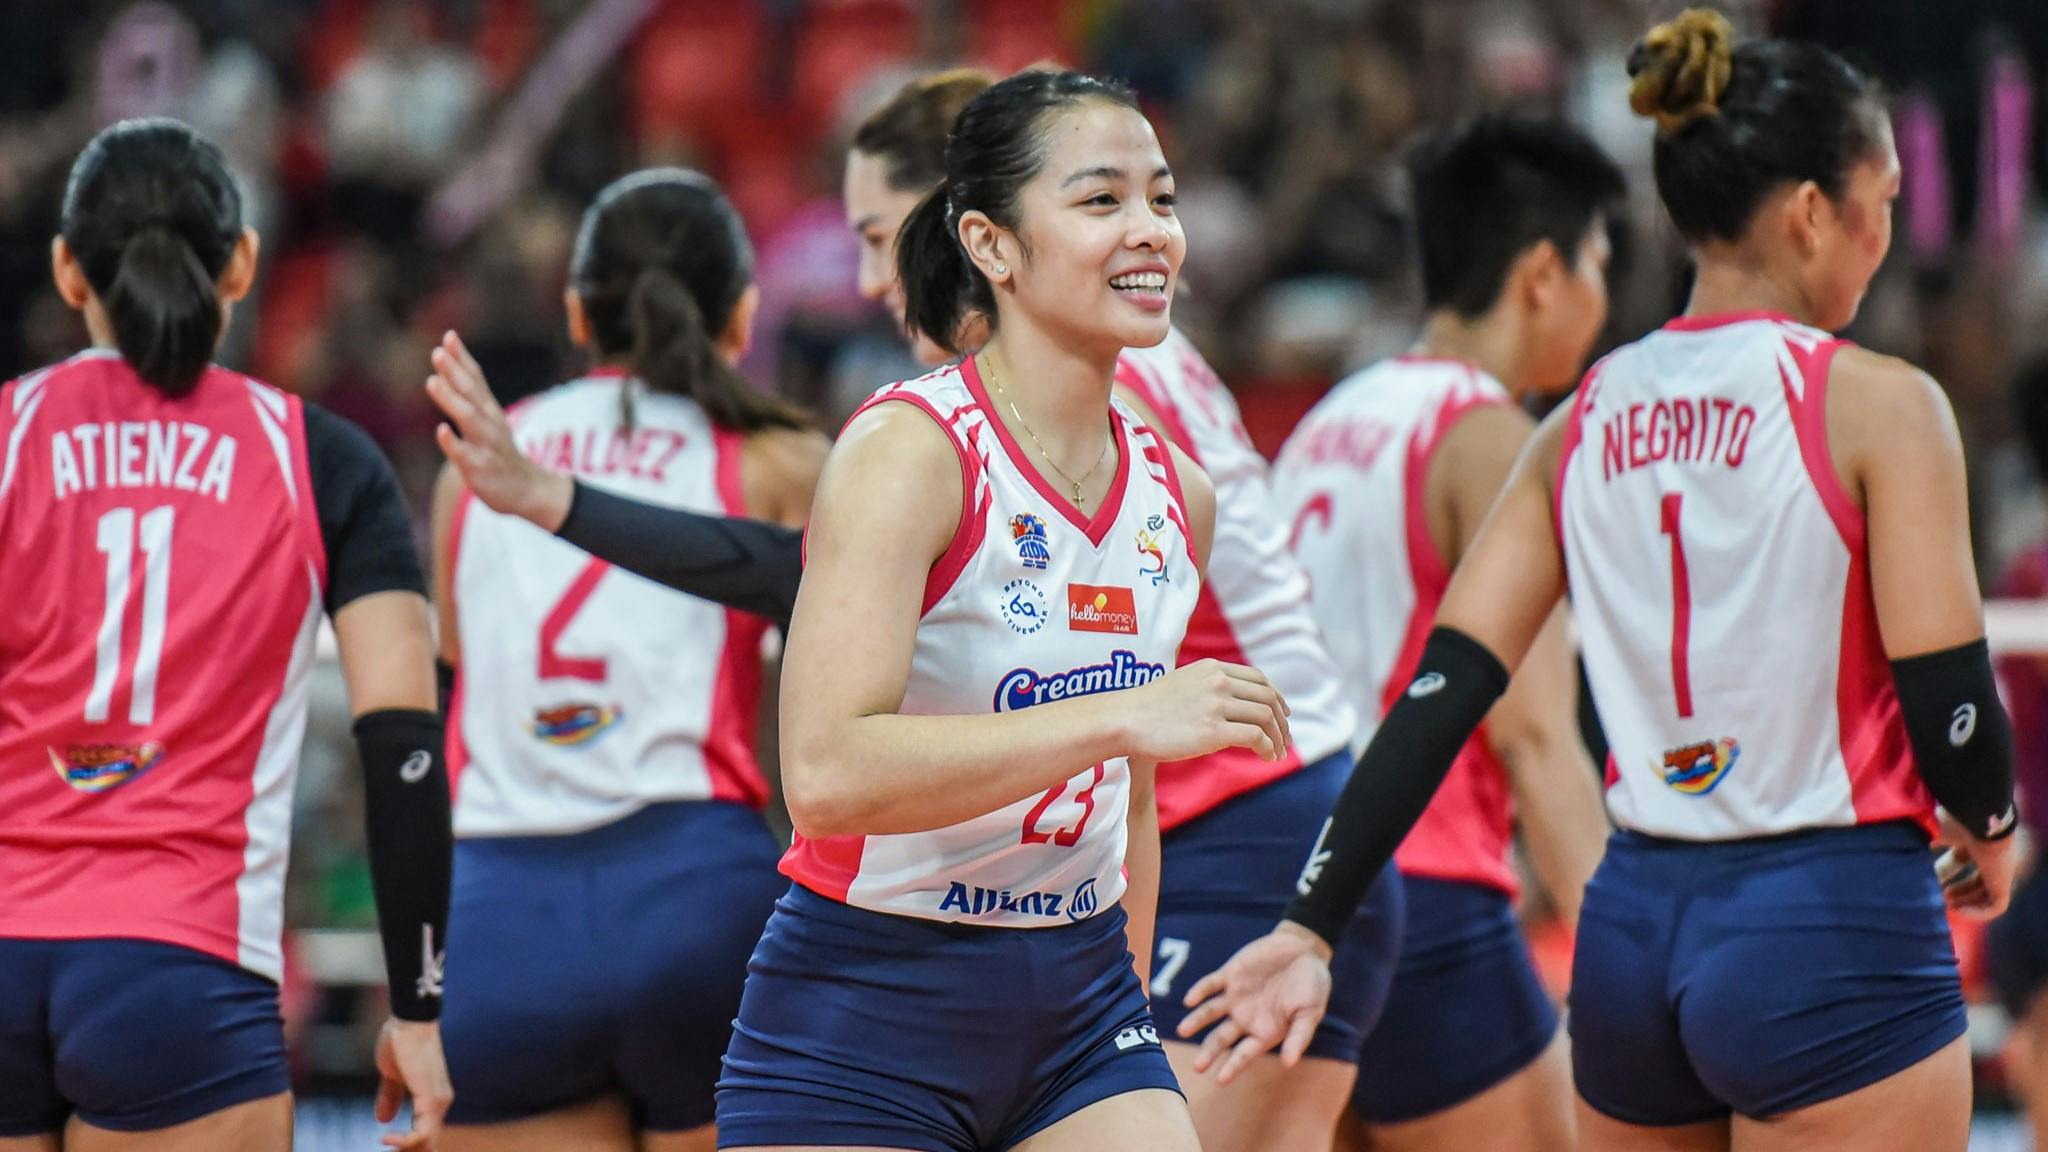 PVL: After Creamline loss, Jema Galanza commends Choco Mucho’s growth